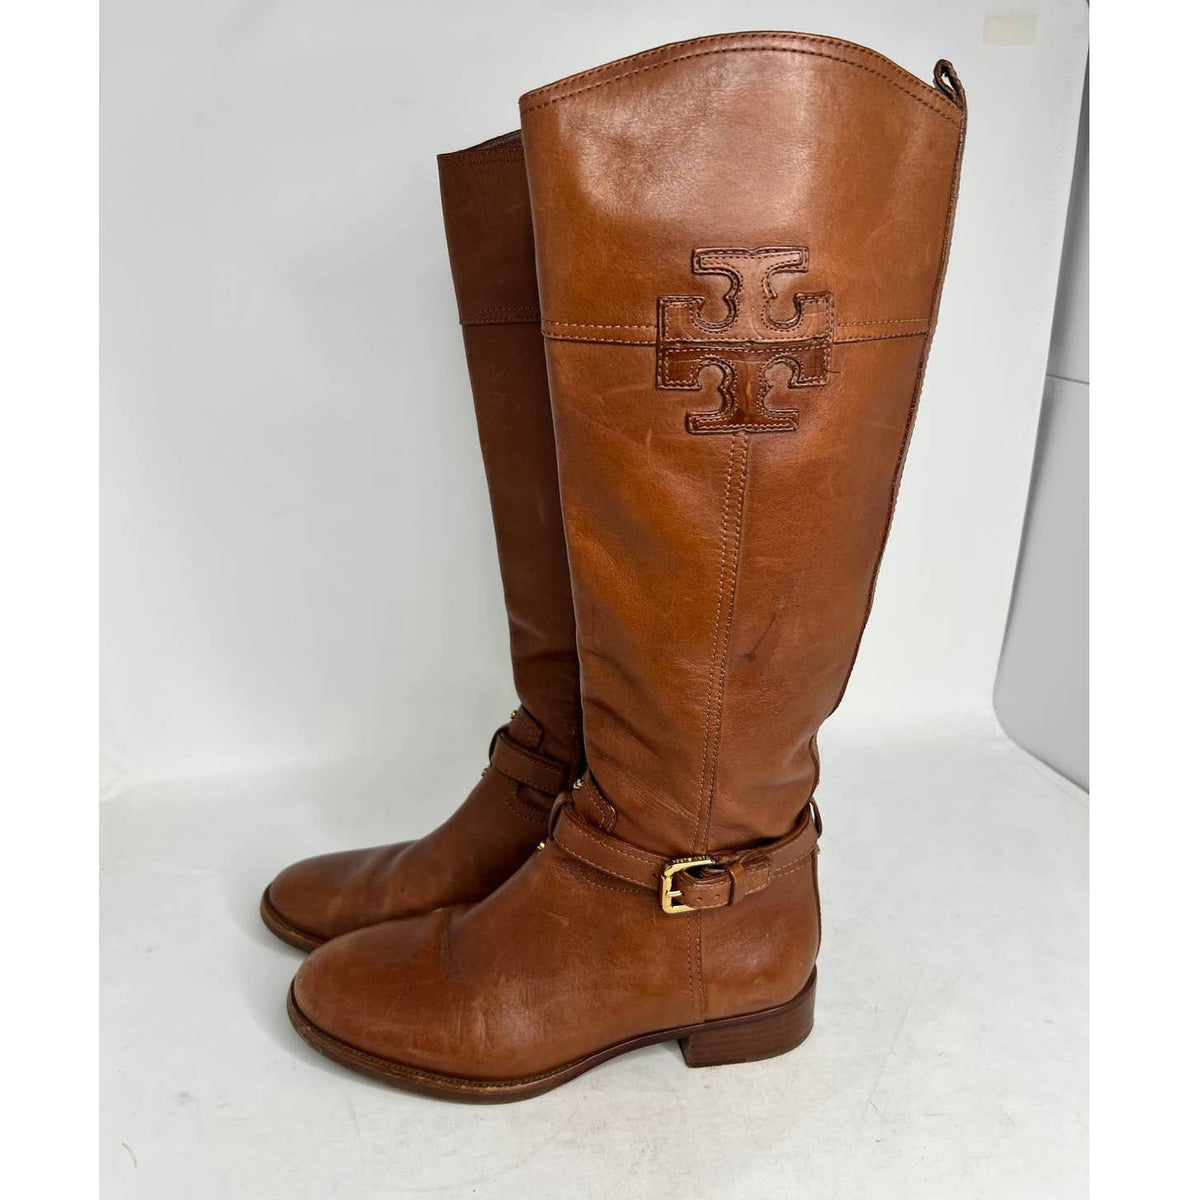 Tory Burch Blaire Brown Riding Boots Sz.8.5